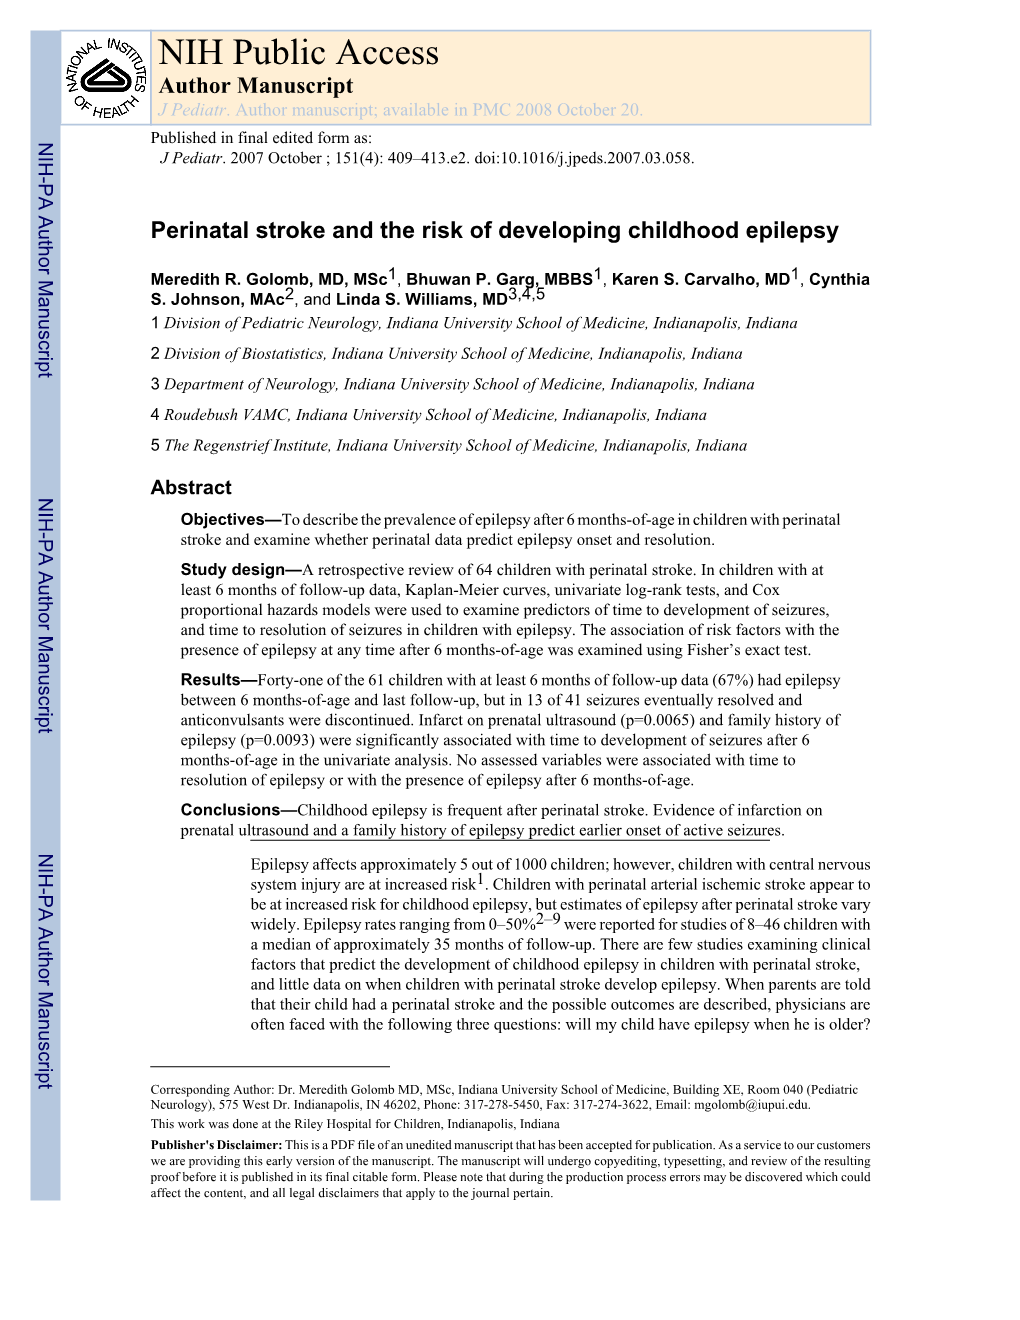 Perinatal Stroke and the Risk of Developing Childhood Epilepsy